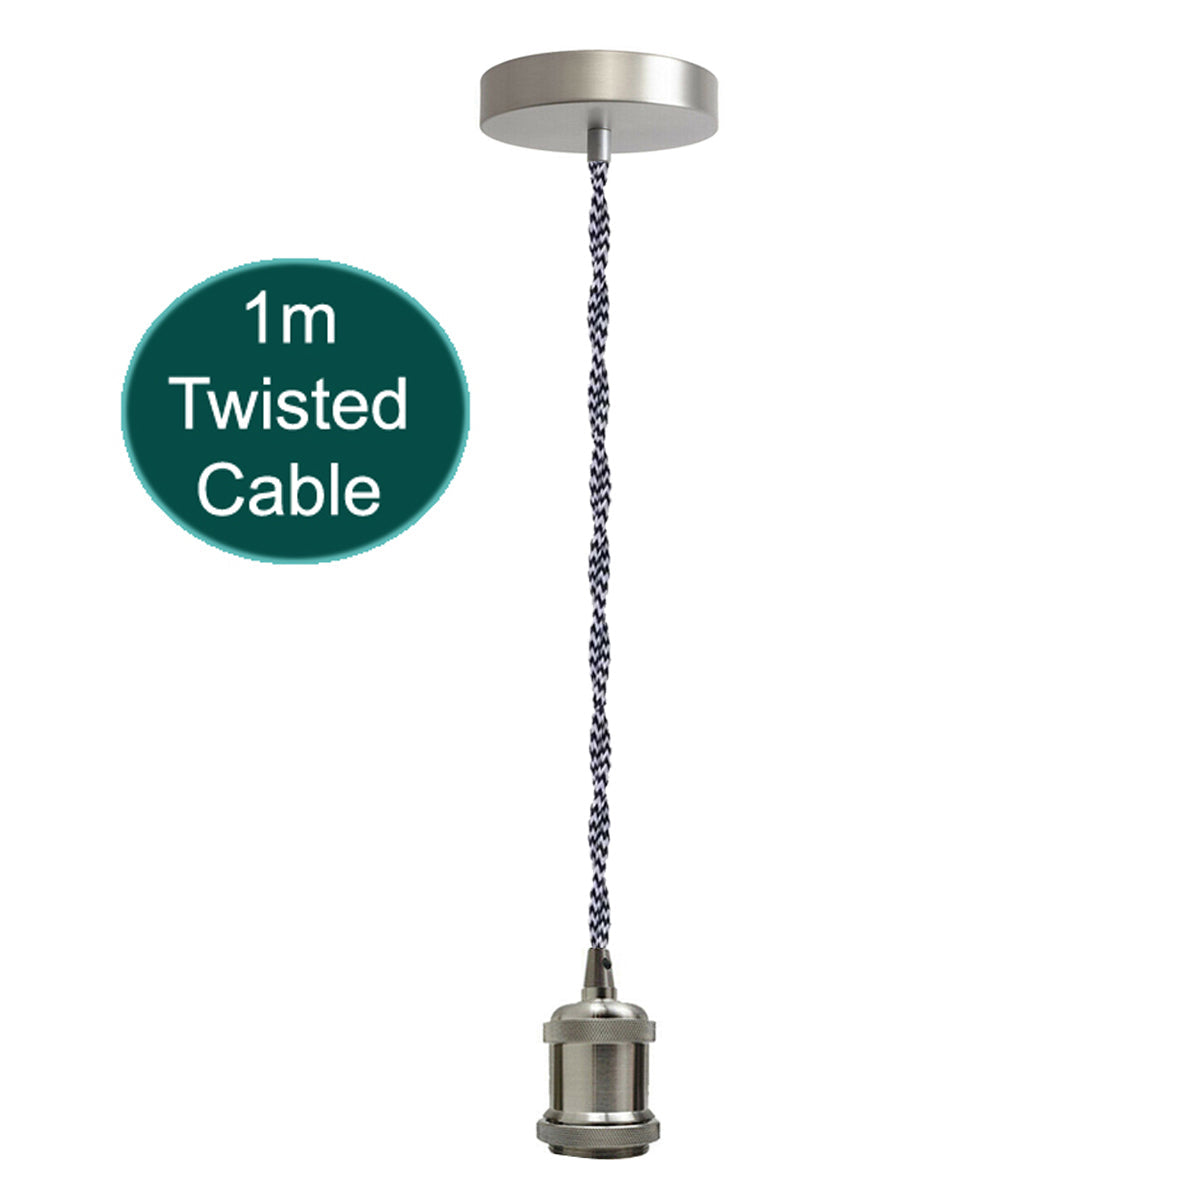 1m Black And White Twisted Cable E27 Base Satin Nickel Holder~1709 - electricalsone UK Ltd